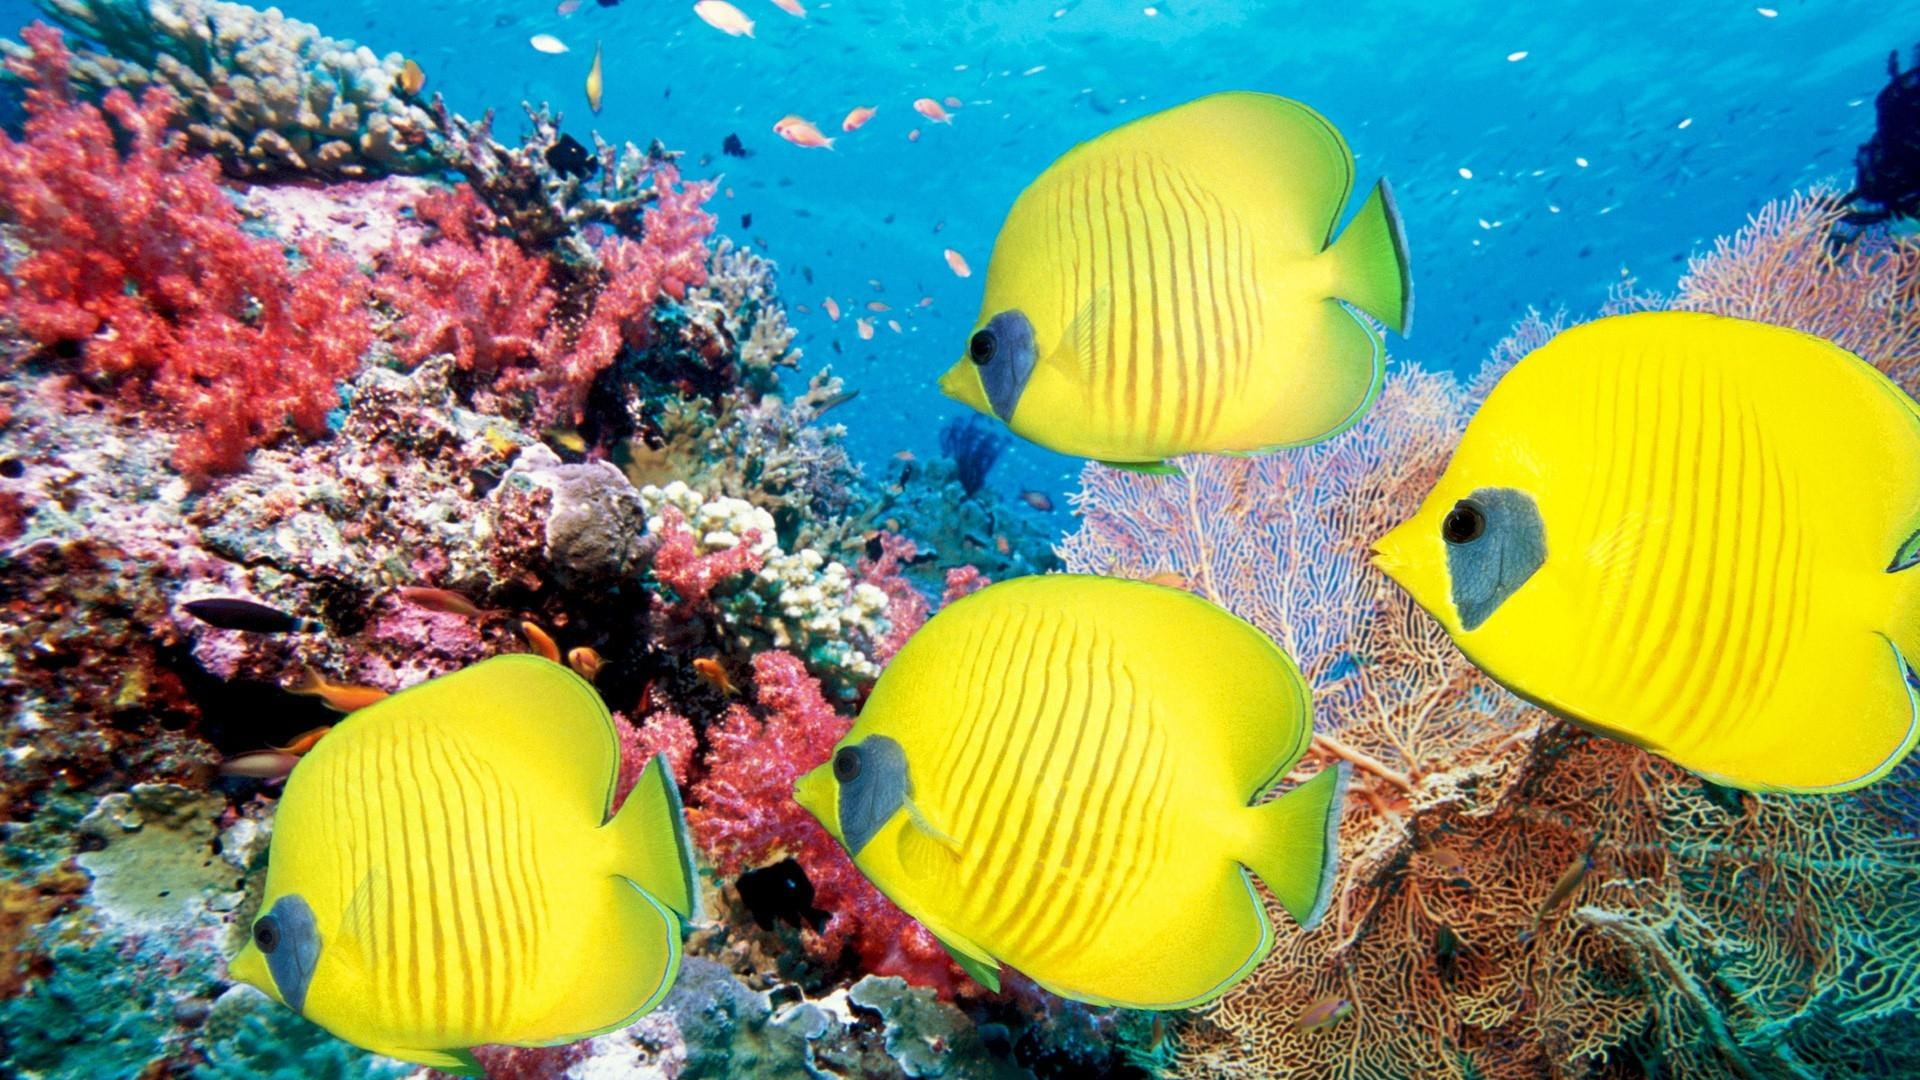 Animals Fishes Ocean Sea Life Tropical Underwater Water Color Yellow Bright Reef Coral Eyes Best